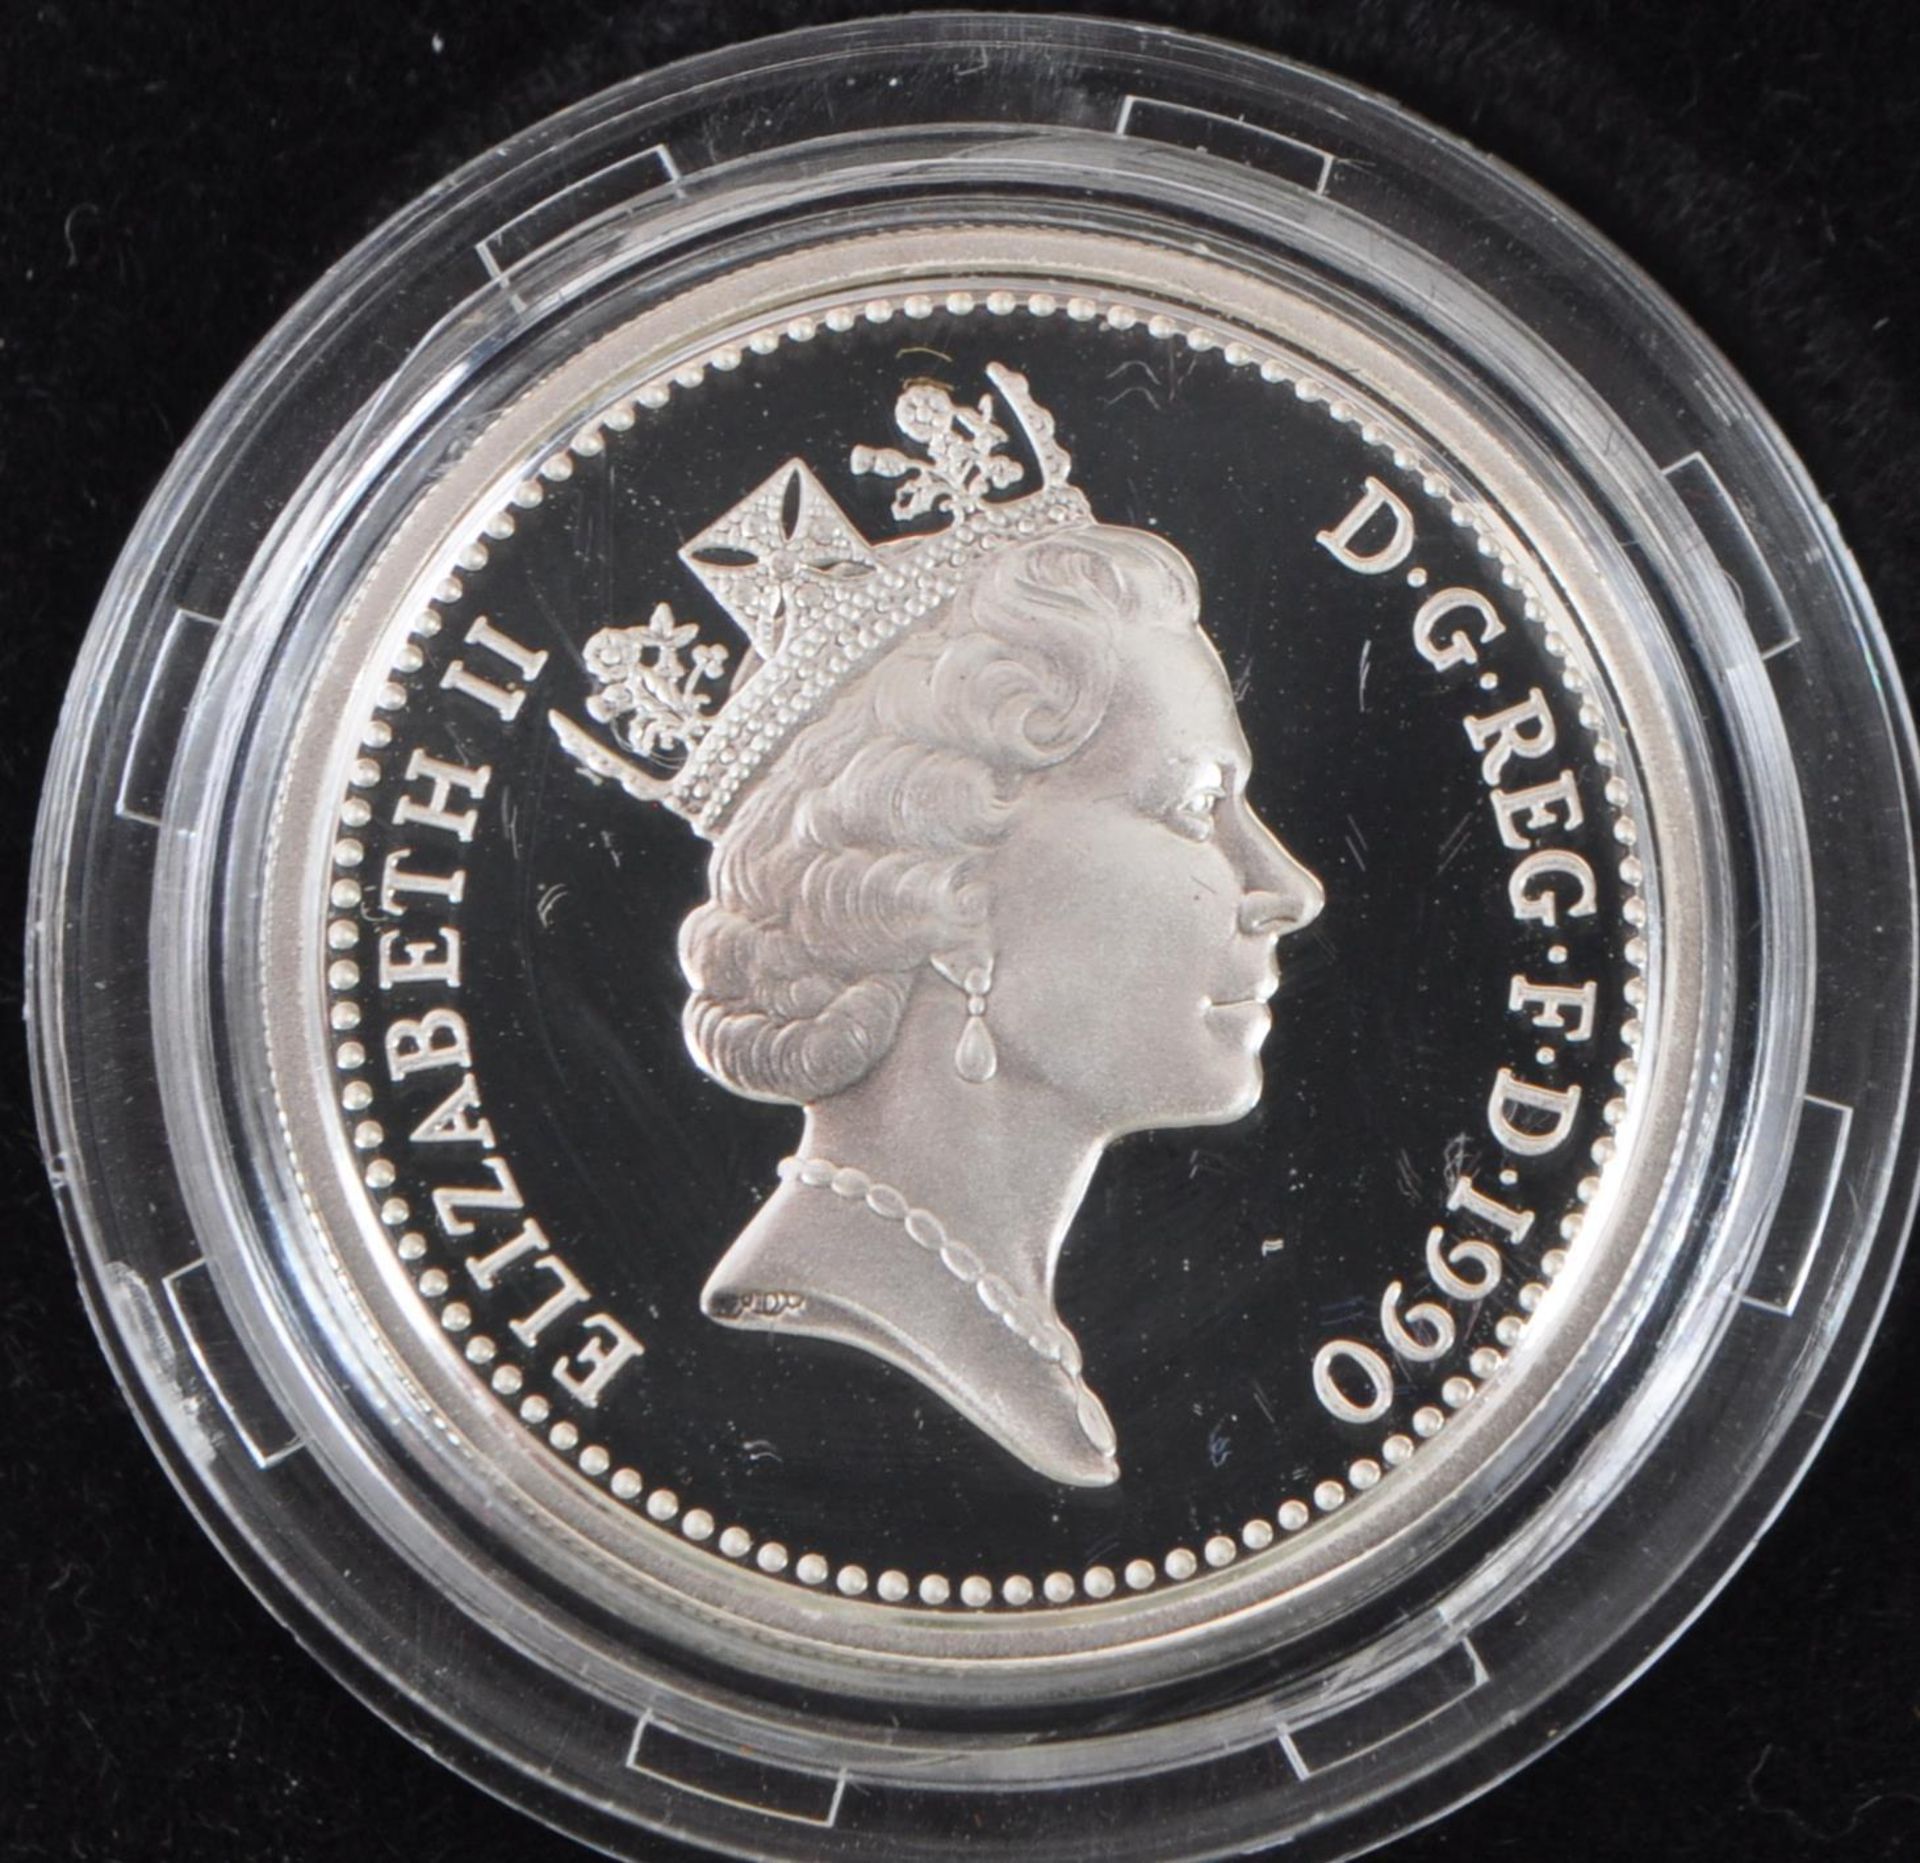 SET OF FOUR ROYAL MINT SILVER PROOF ONE POUND / £1 COINS - Image 6 of 6